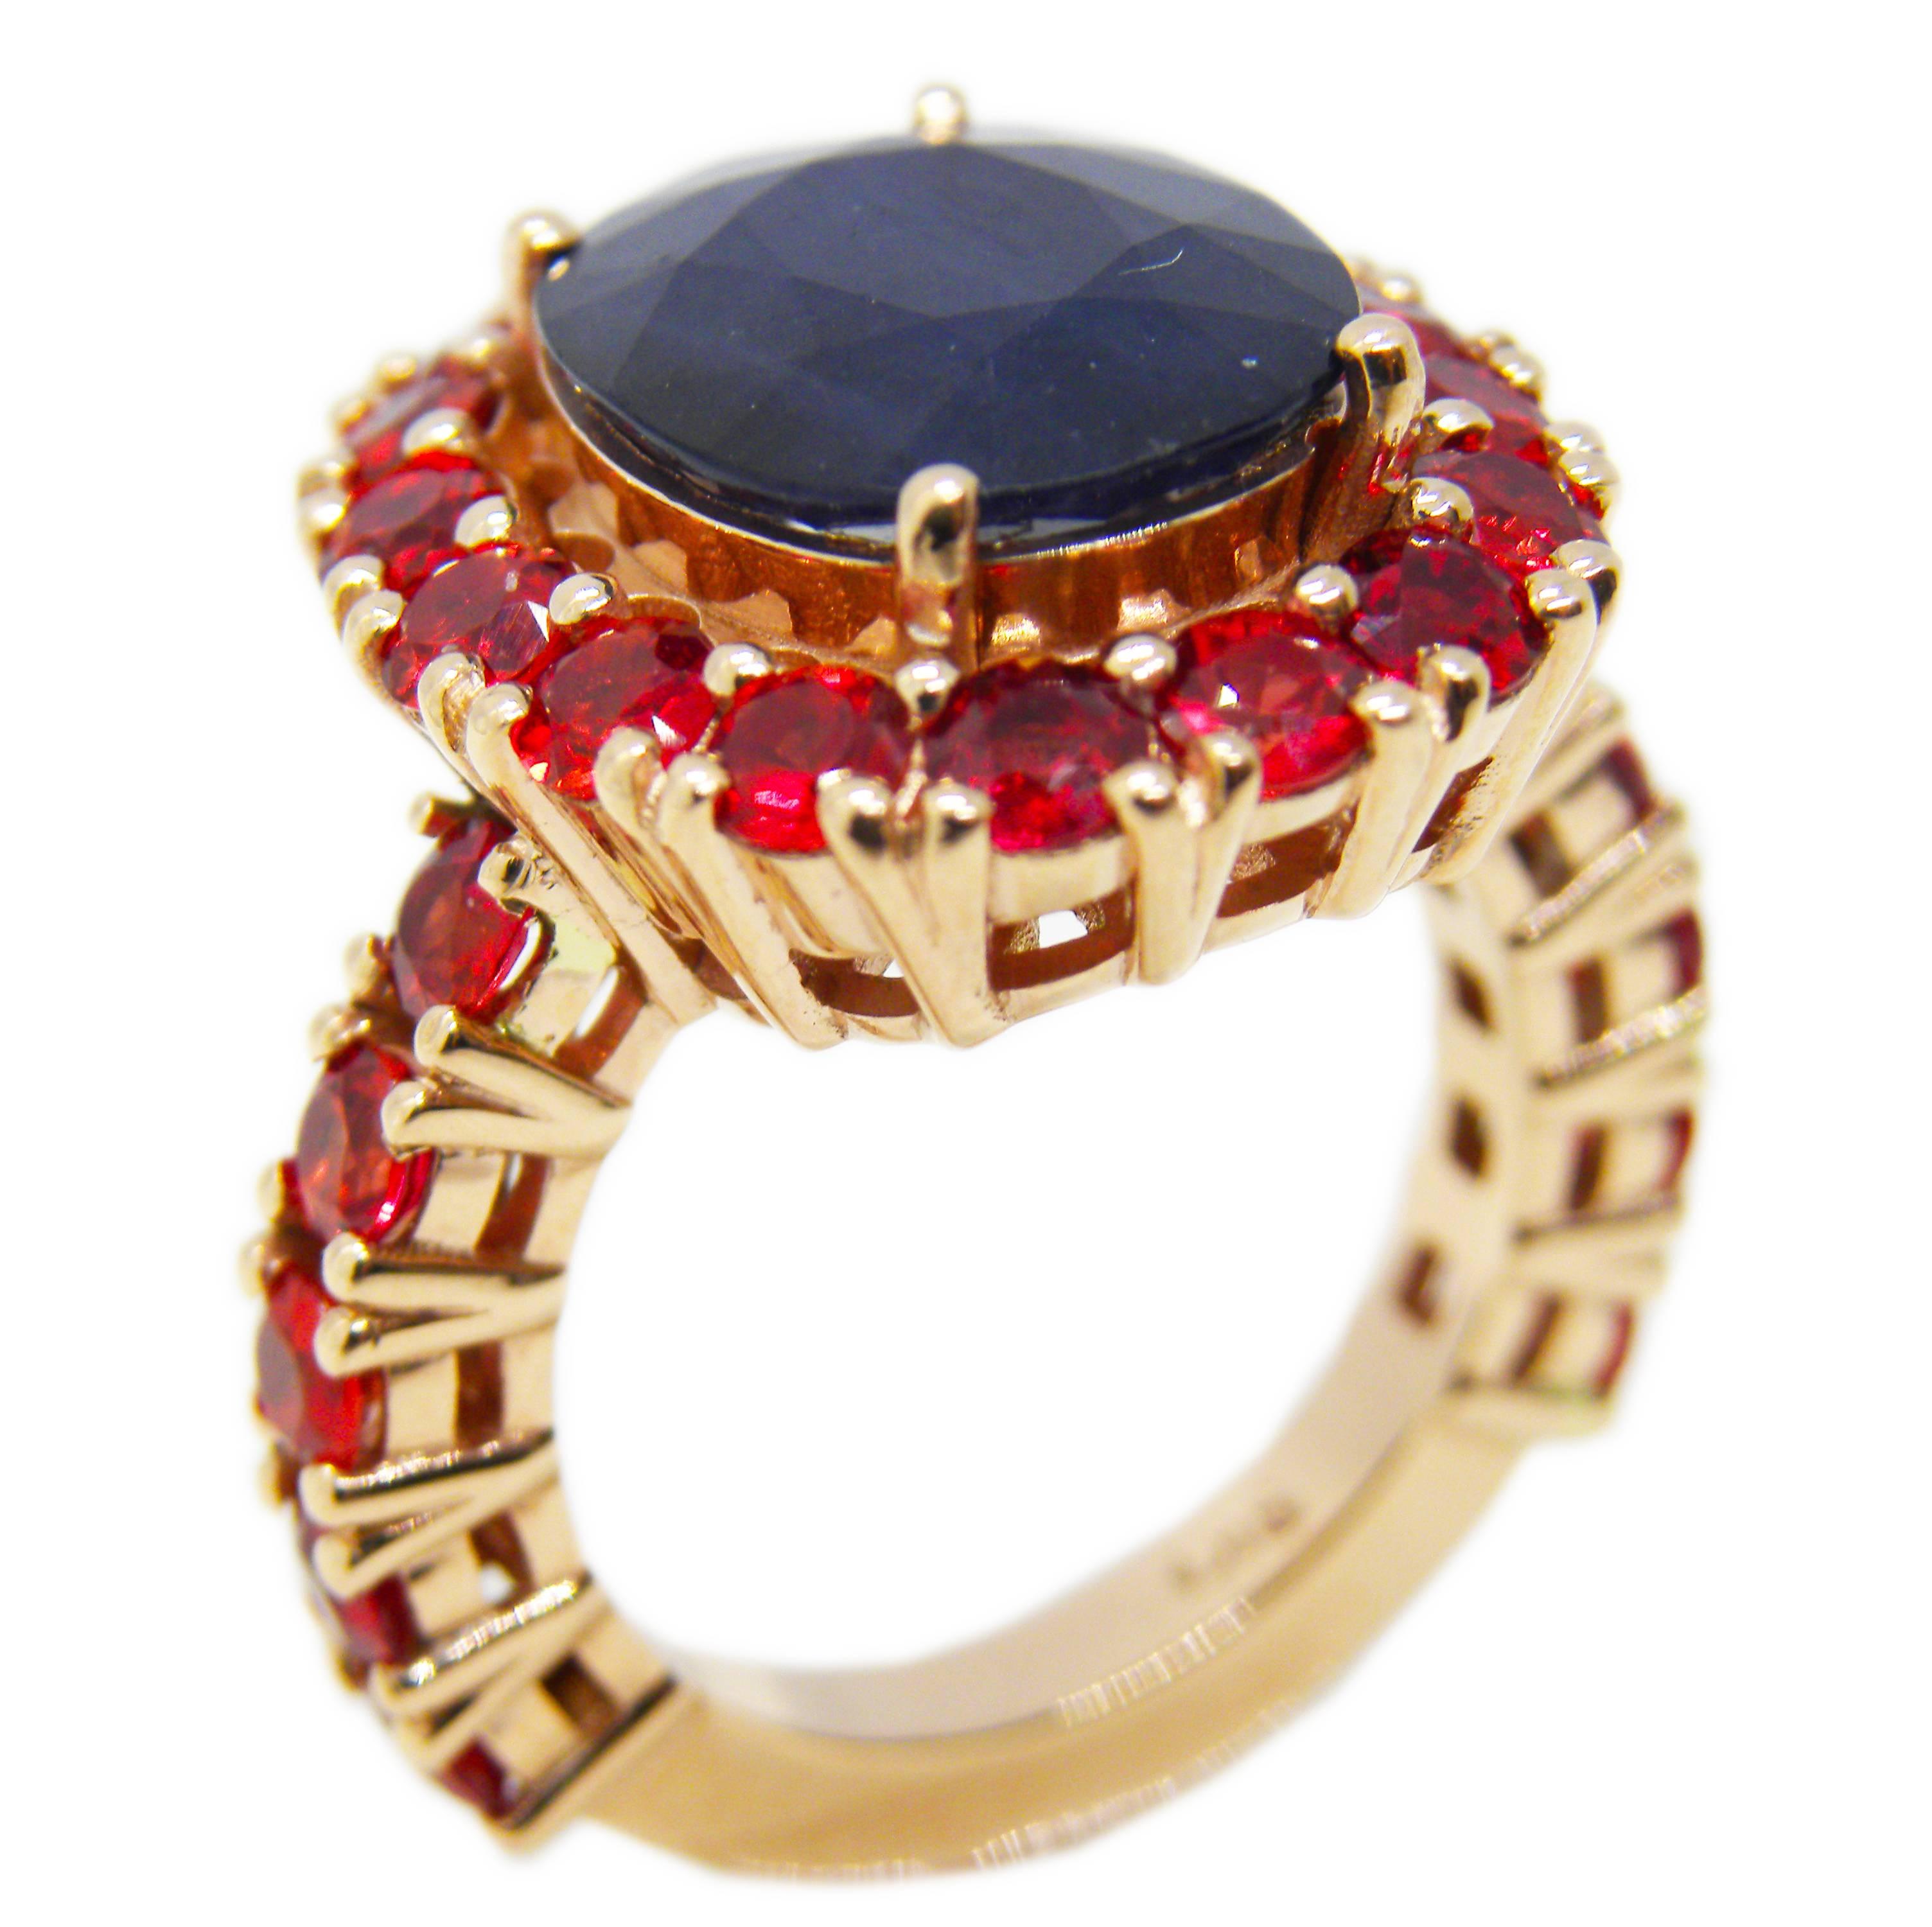 6.05 Carat Natural Oval Sapphire 3.81 Carat Red Spinel Cocktail Ring 3